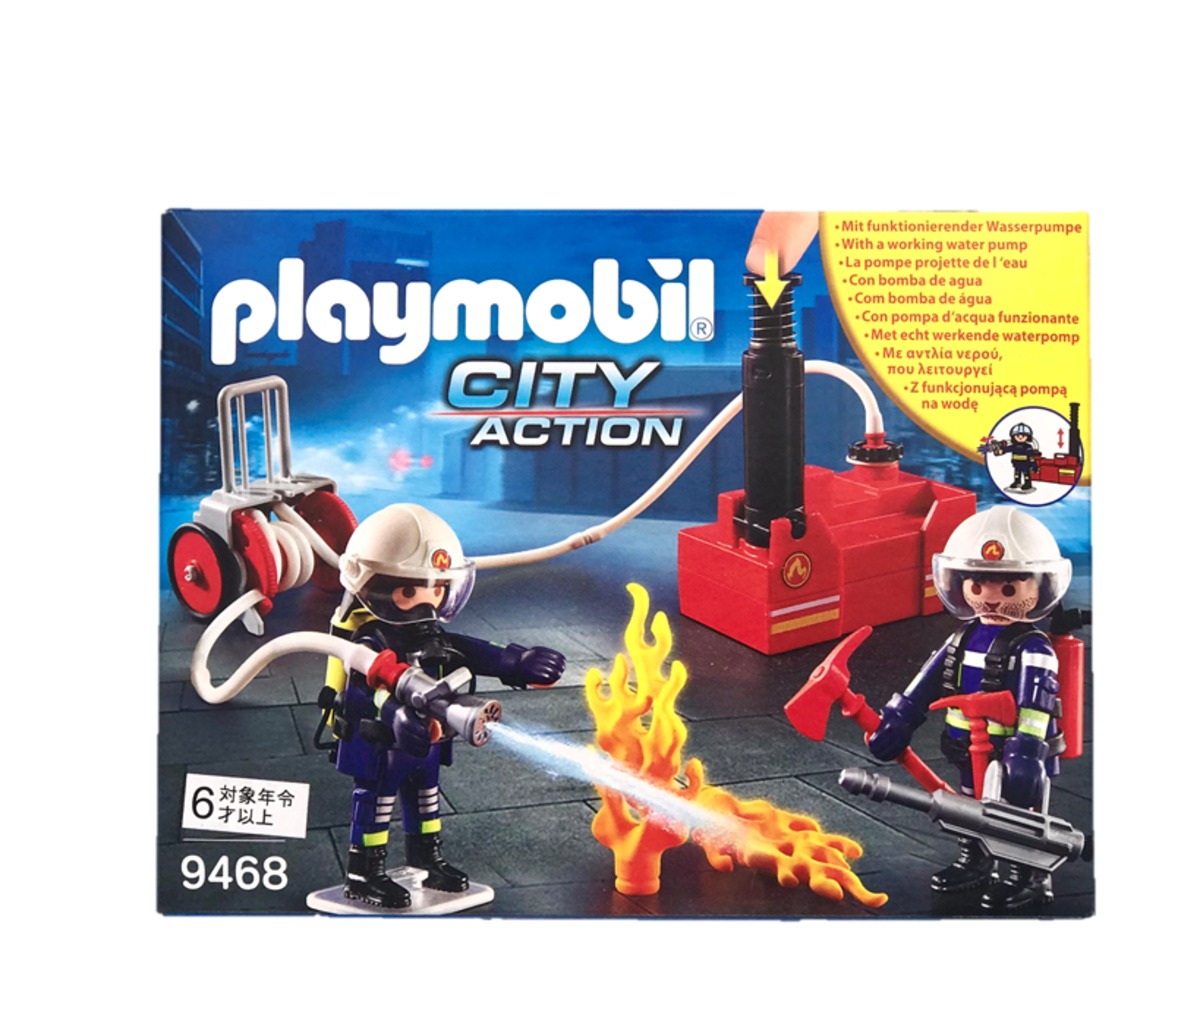 City Action -Fire fighters9468【Playmobil】プレイモービル9468消防士と消火装置 | COCOON PLUS